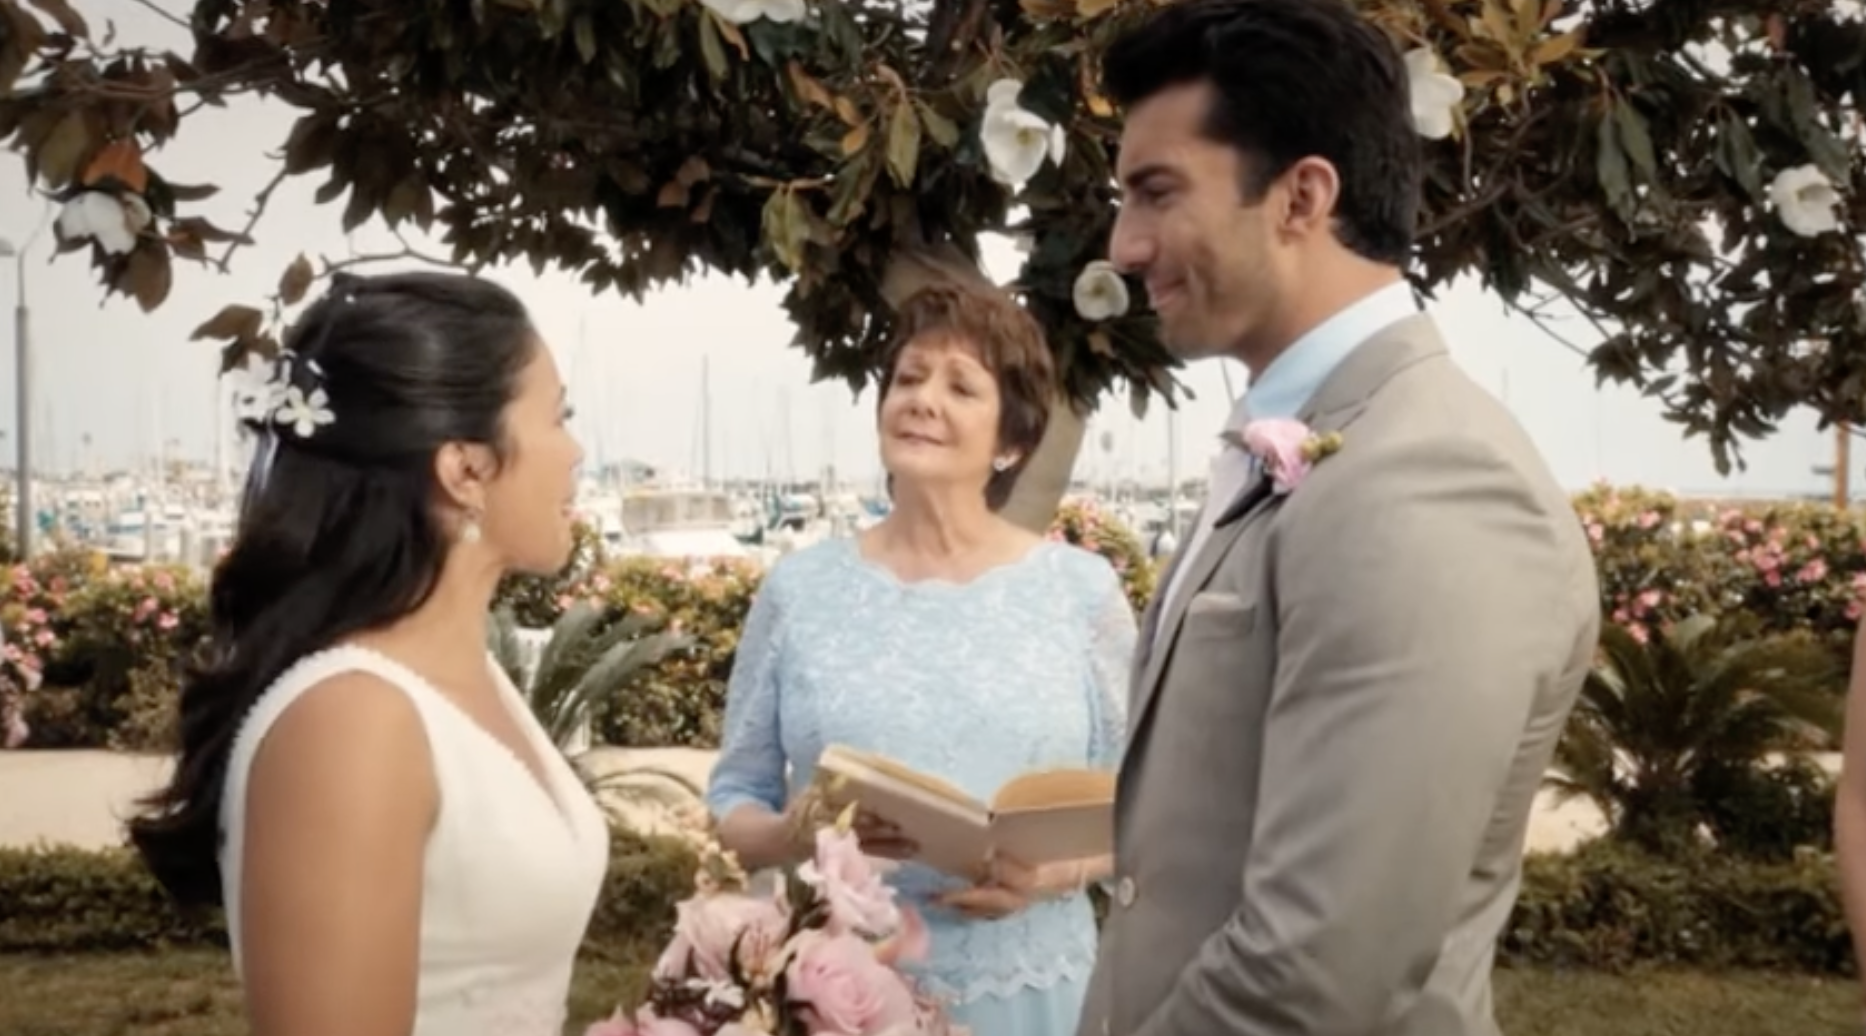 Jane, in a wedding dress, stands opposite Rafael, in a gray suit, while her grandmother stands between them reading from a book